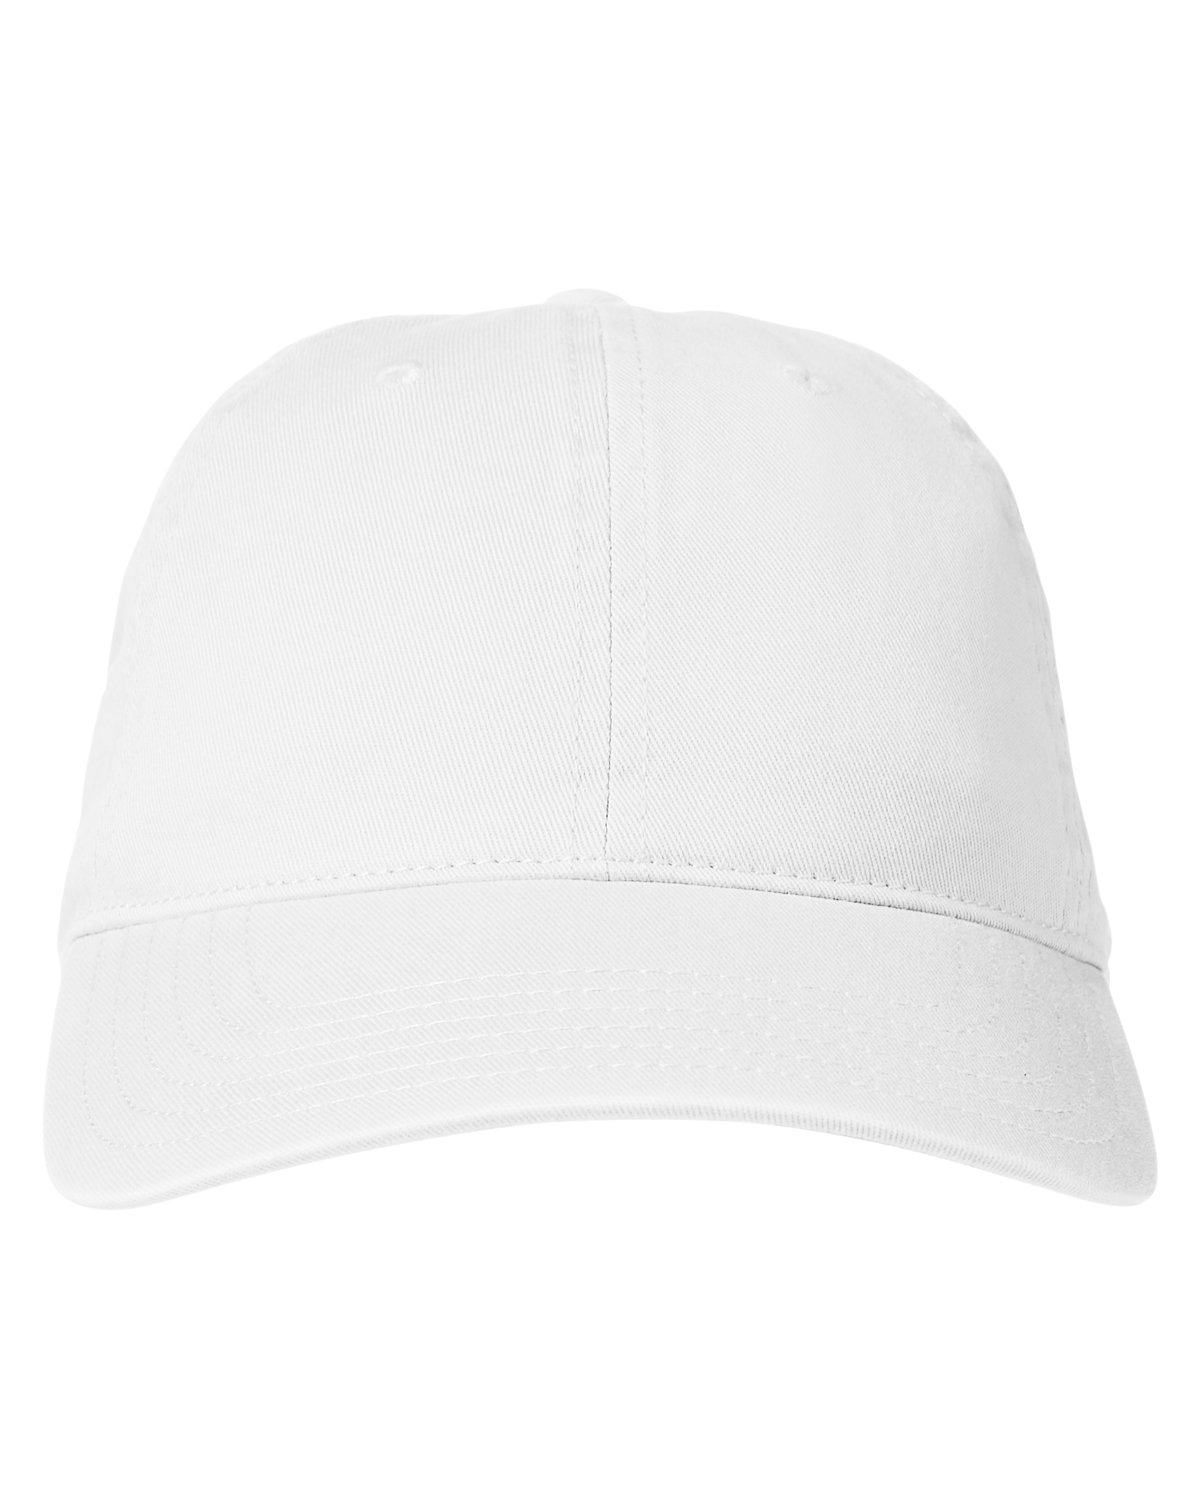 R Dad Cap-Russell Athletic